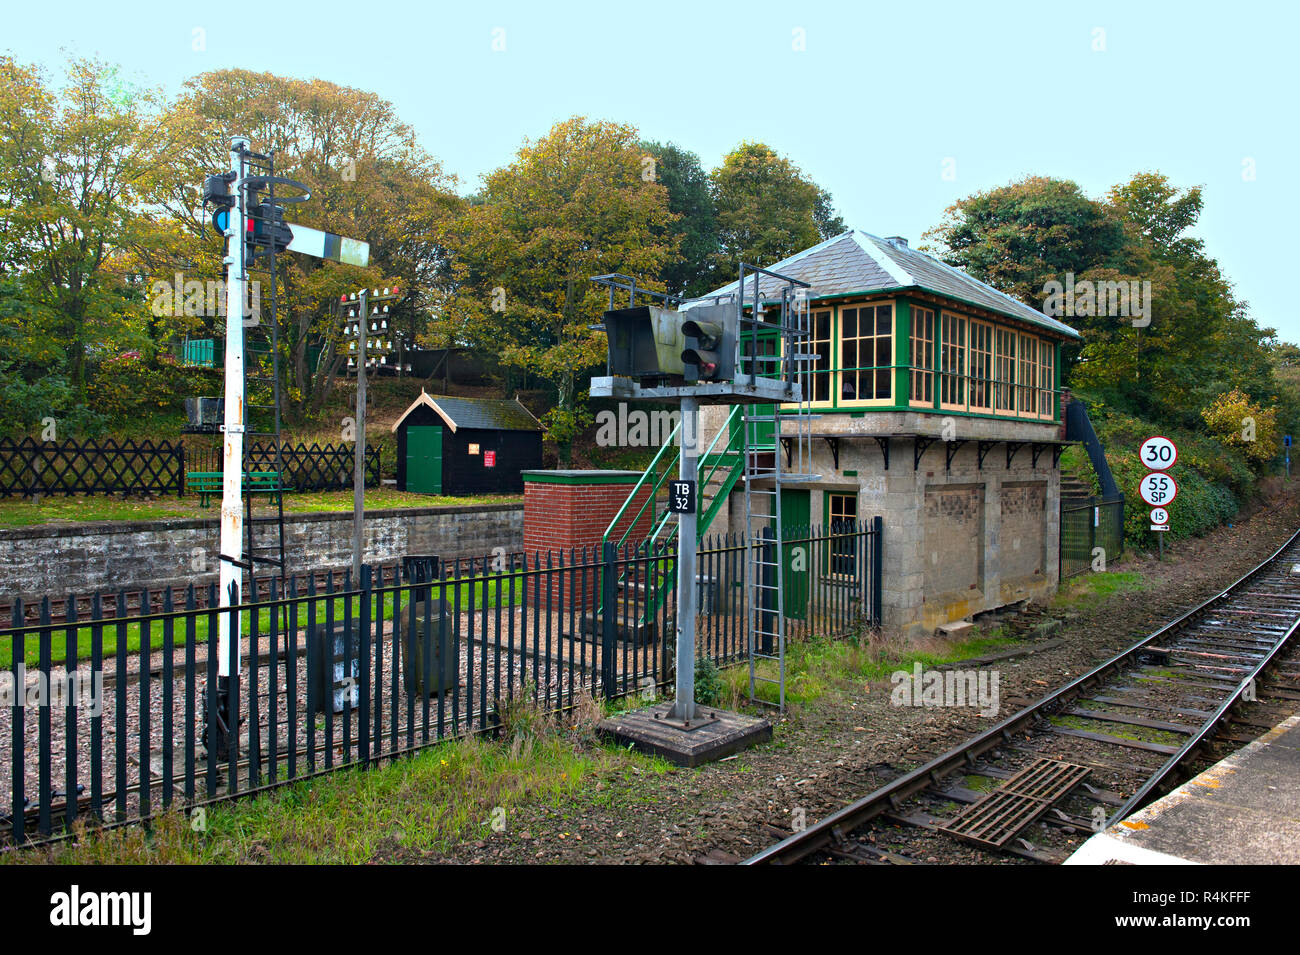 The preserved and listed Cromer Yard Signal Box at Cromer Station on the Norwich to Sheringham 'Bittern Line' in Norfolk, UK Stock Photo